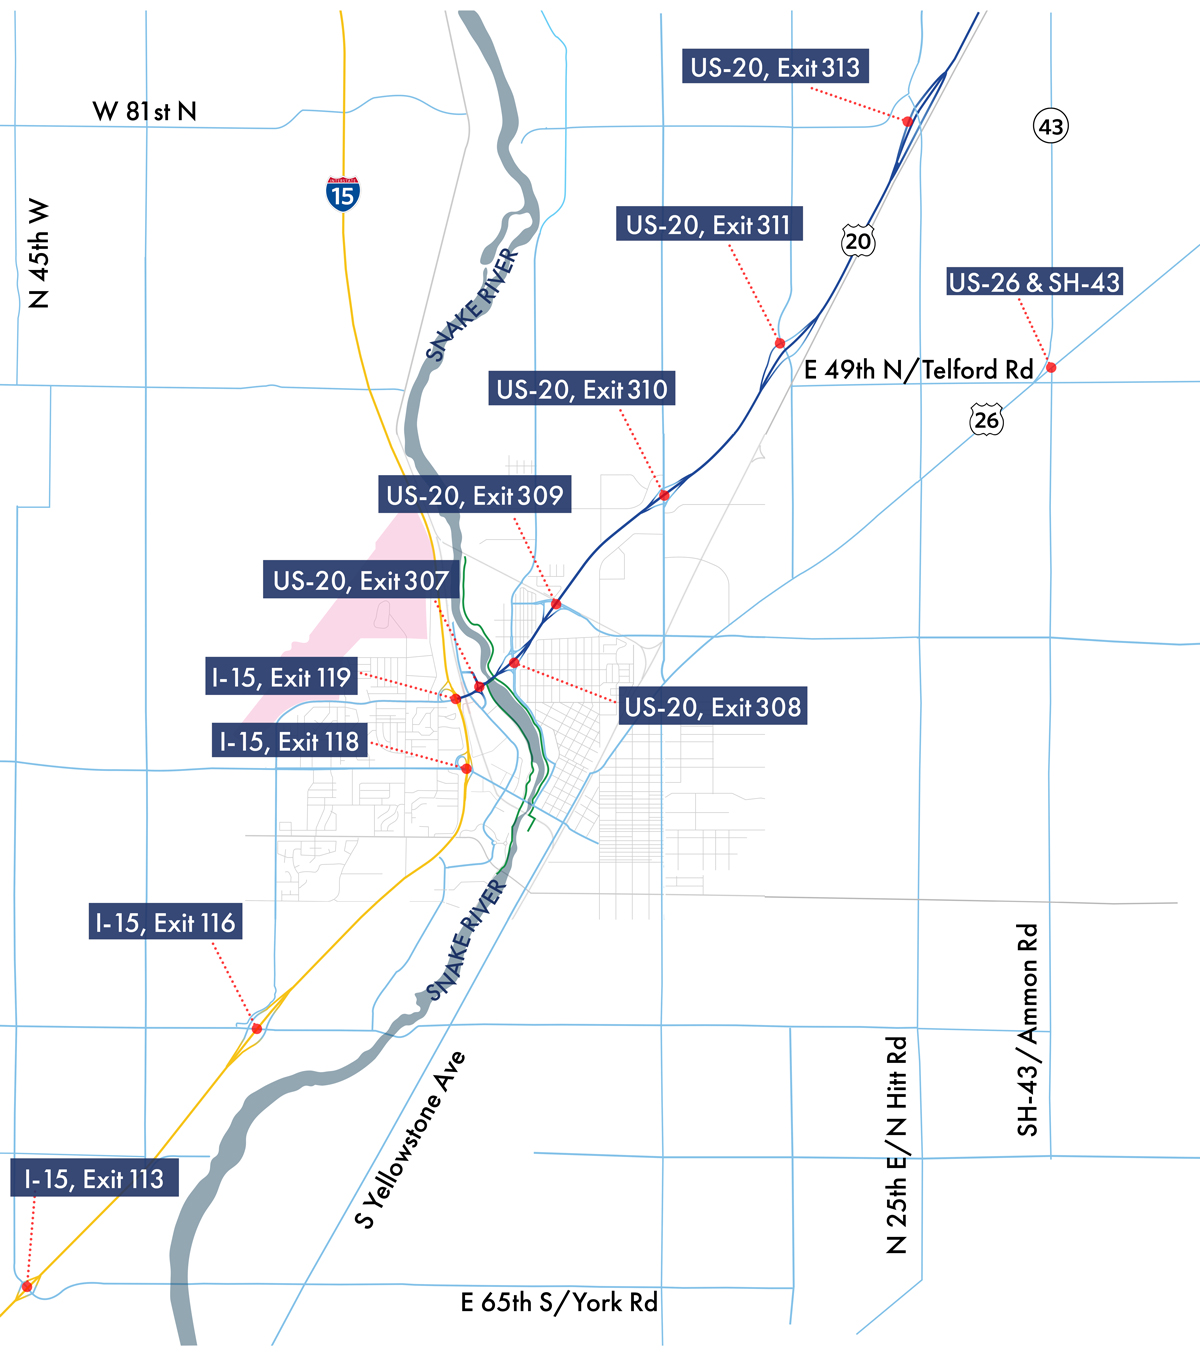 This overall graphic depiction of the project area map of the I-15/US20 Connector Study includes I-15 Exits 113, 116, 118, and 119; US-20 exits 307, 308, 309, 310, 311, and 313. It also includes N 45th W, W 81st N, US-26 & SH-43, E49th N/Telford Rd, S Yellowstone Ave, E 65th S / York Rd, N 25thE/ N Hitt Rd, and SH-42/ Ammon Rd. A shaded area indicating the airport and Snake River are also identified on this map.